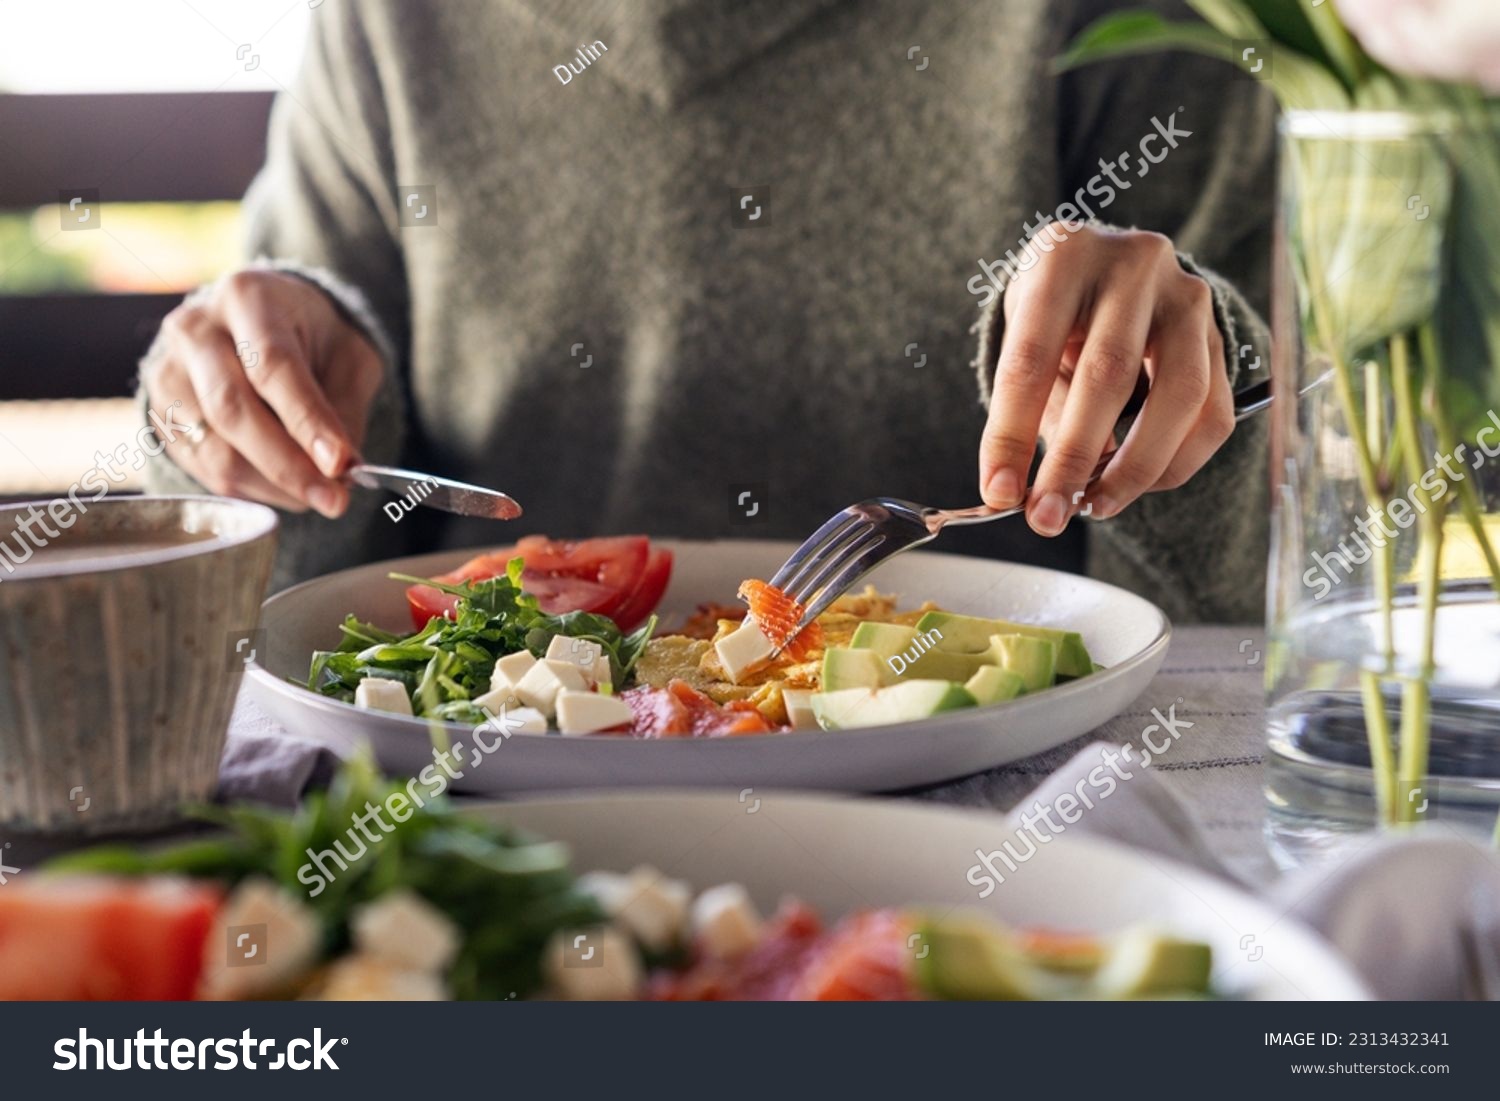 Woman eating healthy morning meal. Healthy breakfast with salmon, omelet, avocado, fresh herbs, cheese and tomatoes #2313432341